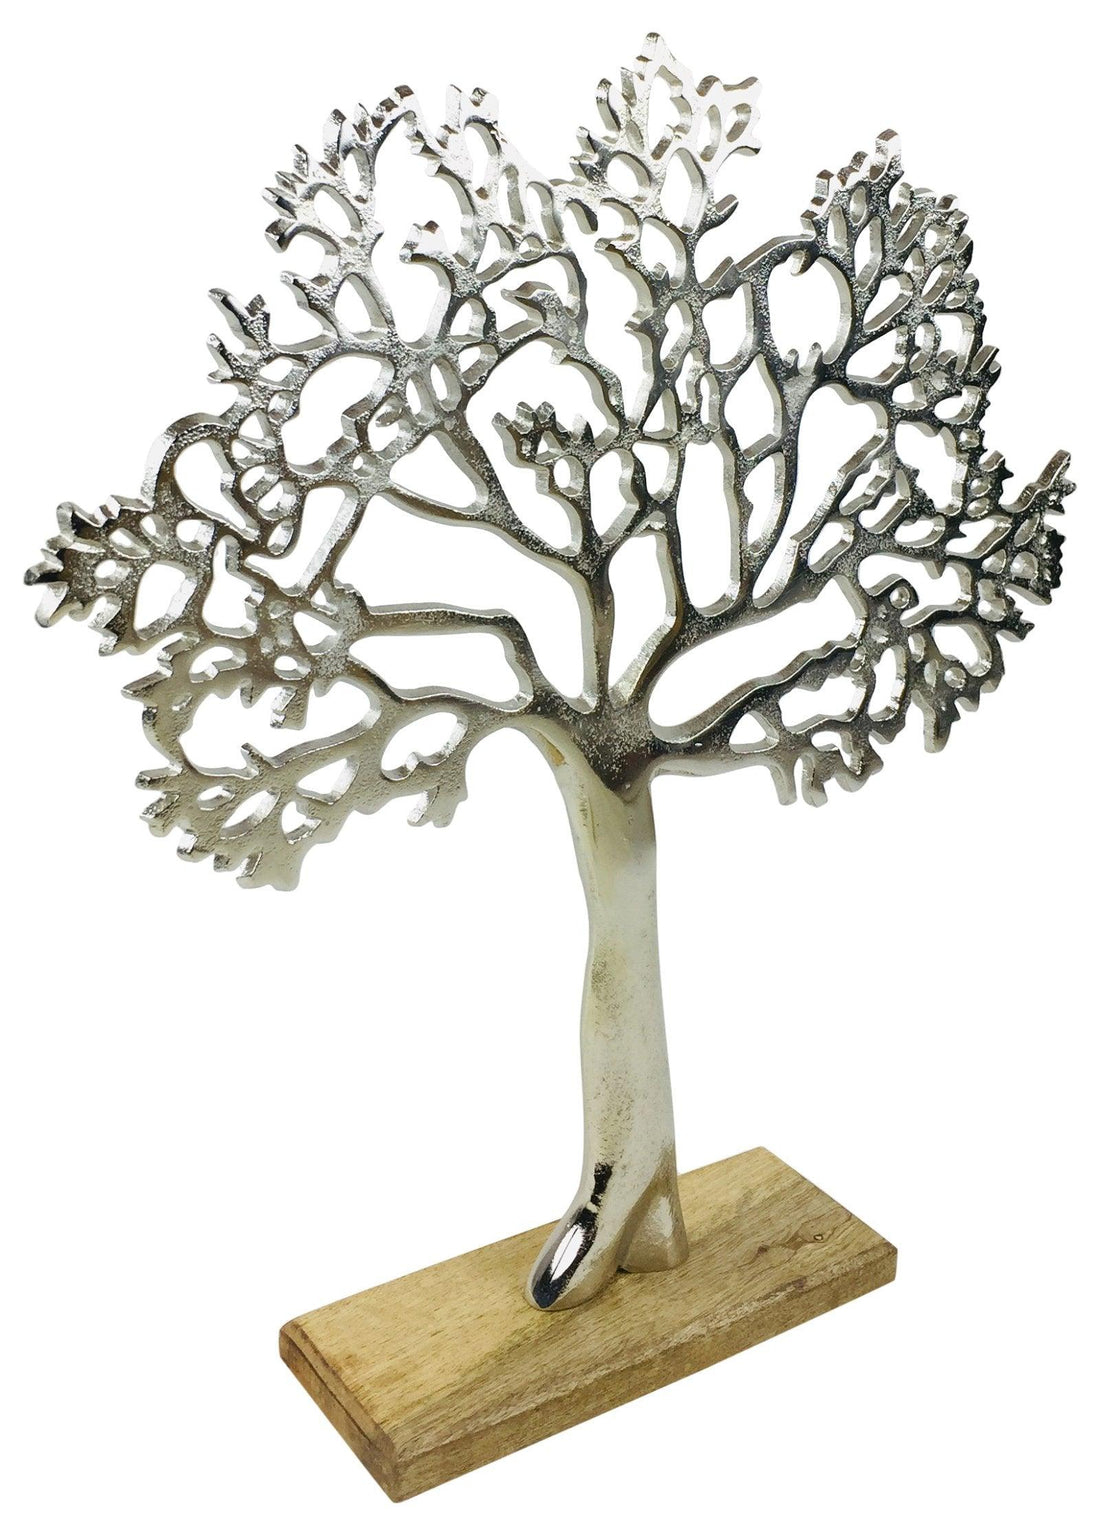 Large Silver Tree Ornament 42cm - £38.99 - Tree Of Life 